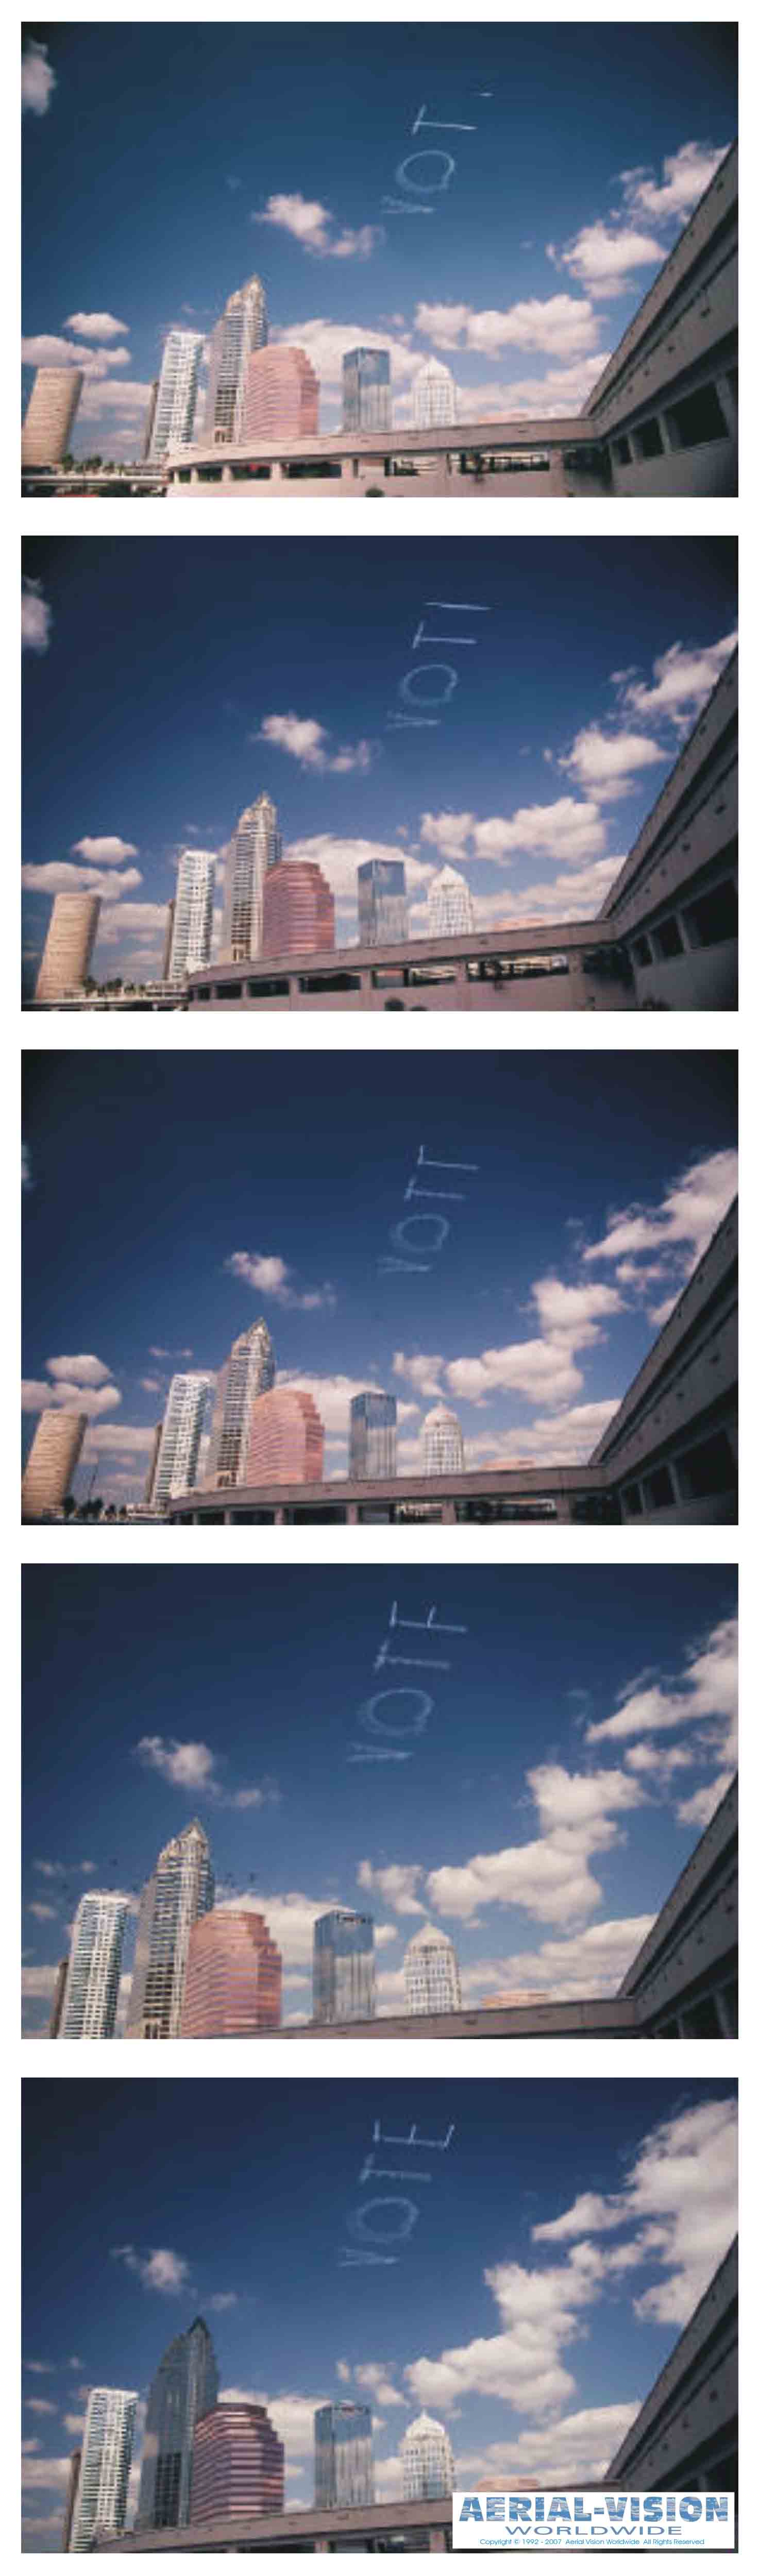 Aerial Advertising Campaigns In Any City